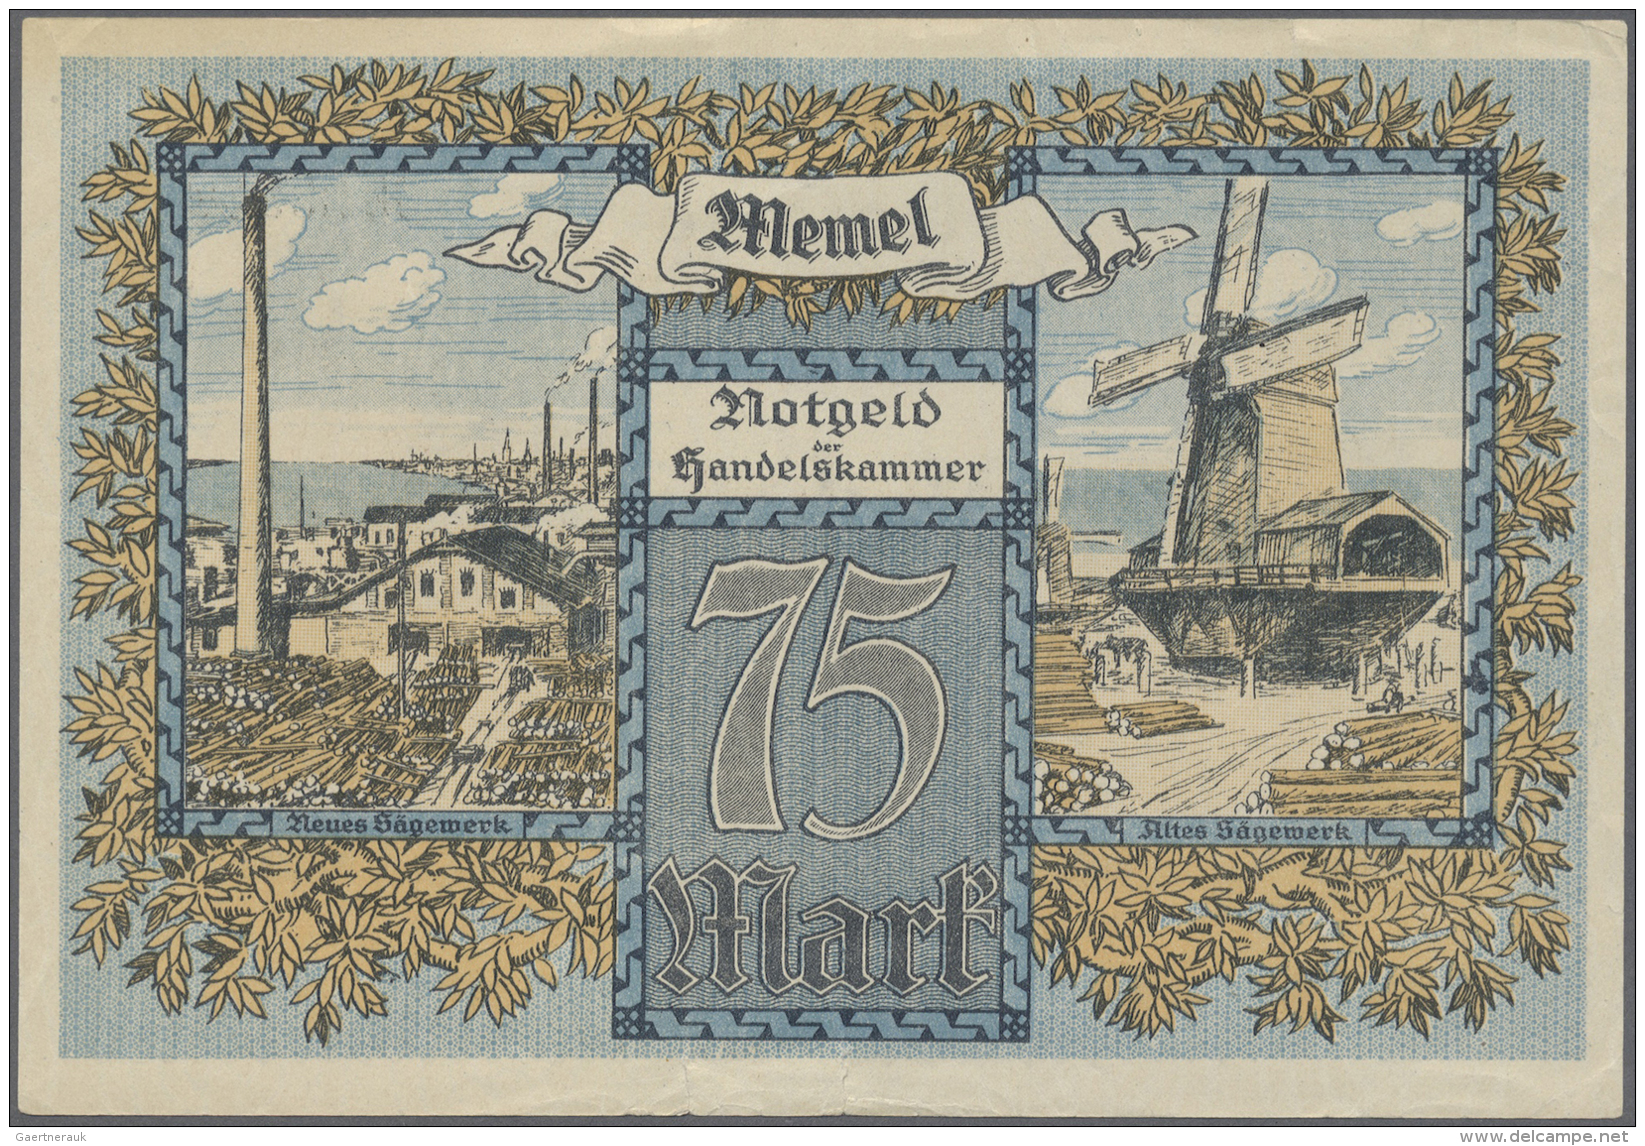 Memel: 75 Mark 1922 P. 8, Never Folded But Creases At Upper Border And 2 Tears (1cm) At Lower Border, Crisp Paper And Ni - Autres - Europe